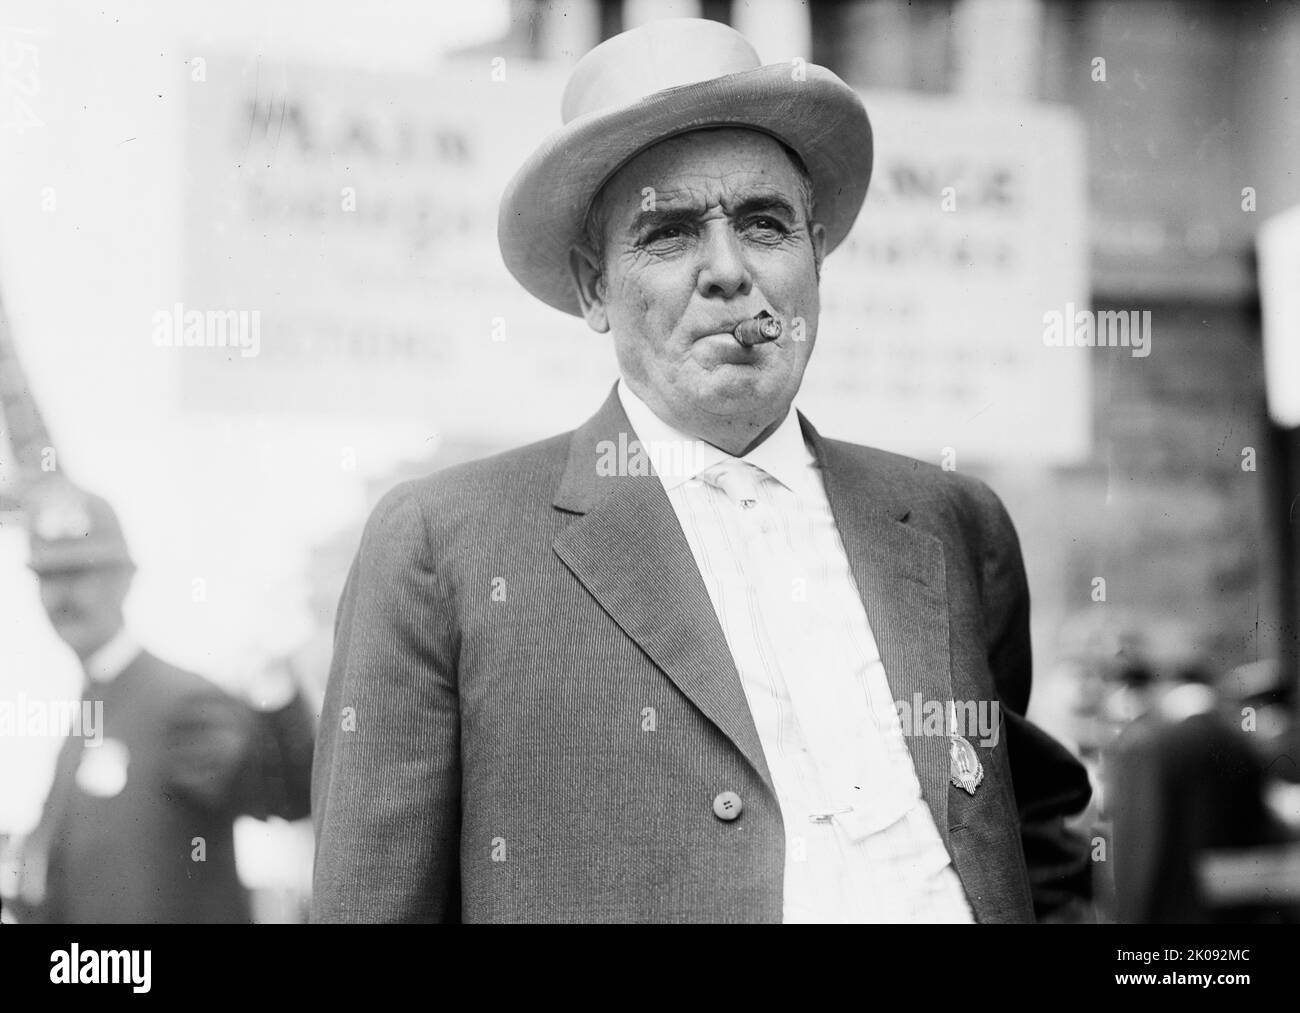 Democratic National Convention - Obadiah Gardner, Senator from Maine, 1912. [US politician and businessman, served as Senator from Maine, 1911-1913]. Stock Photo